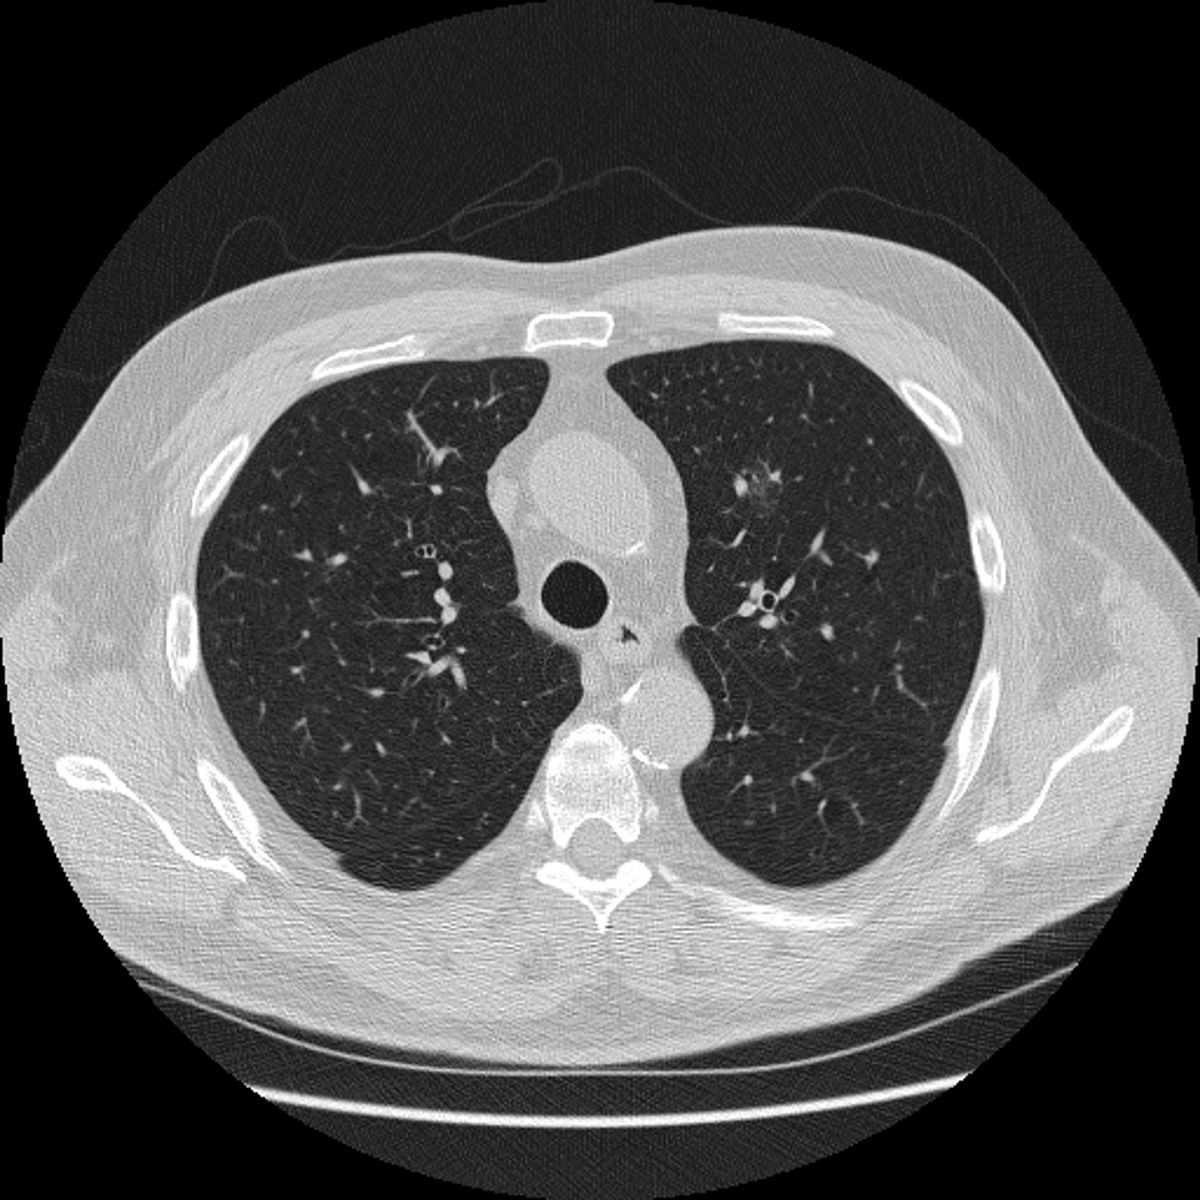 Typical CT scan that shows vessels